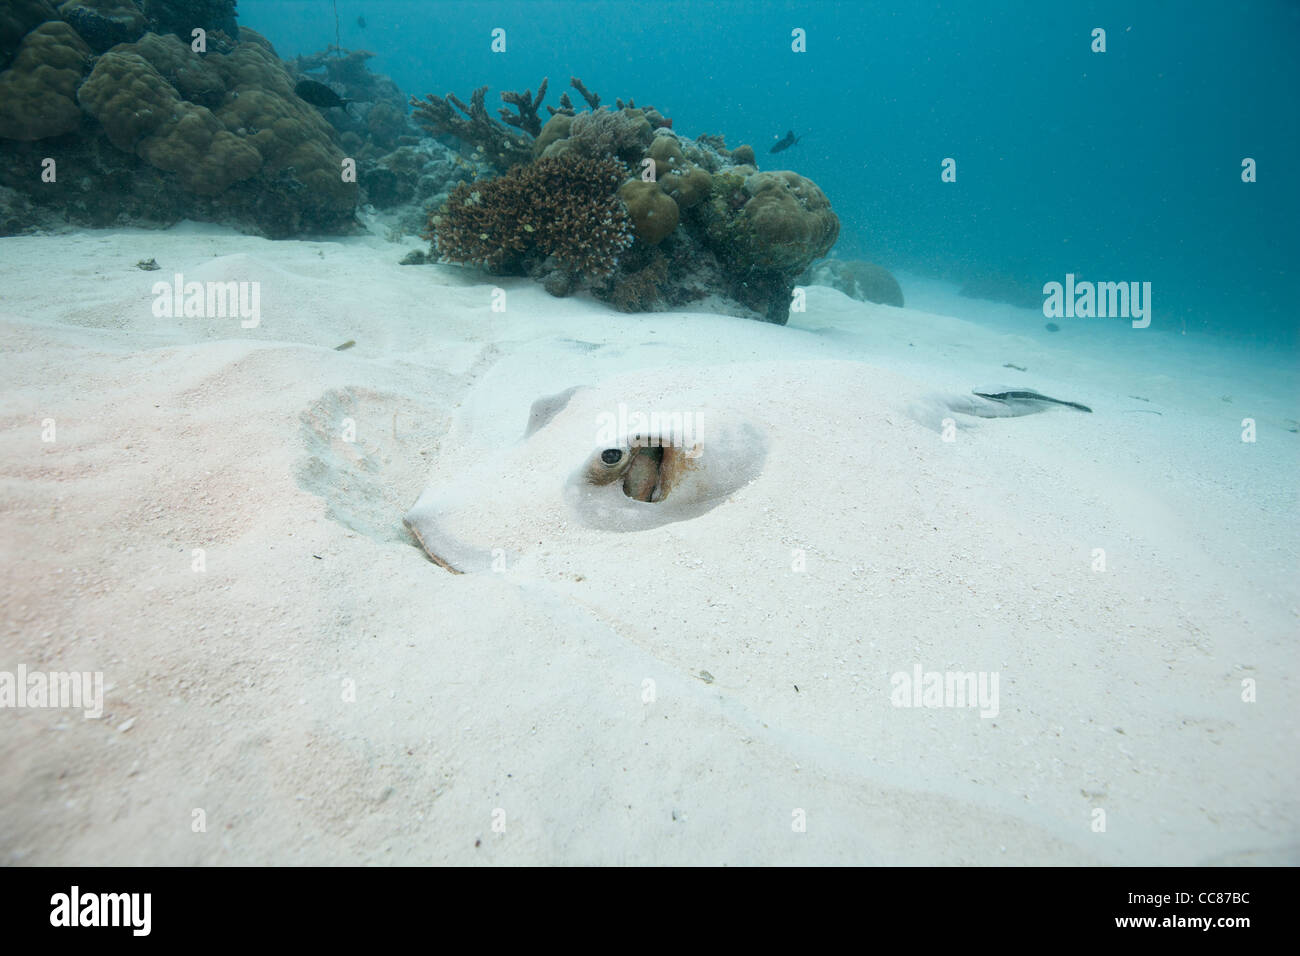 Cowtail Stingray (Pastinachus sephen) with a Remora (Remora sp.) resting in the sand Stock Photo